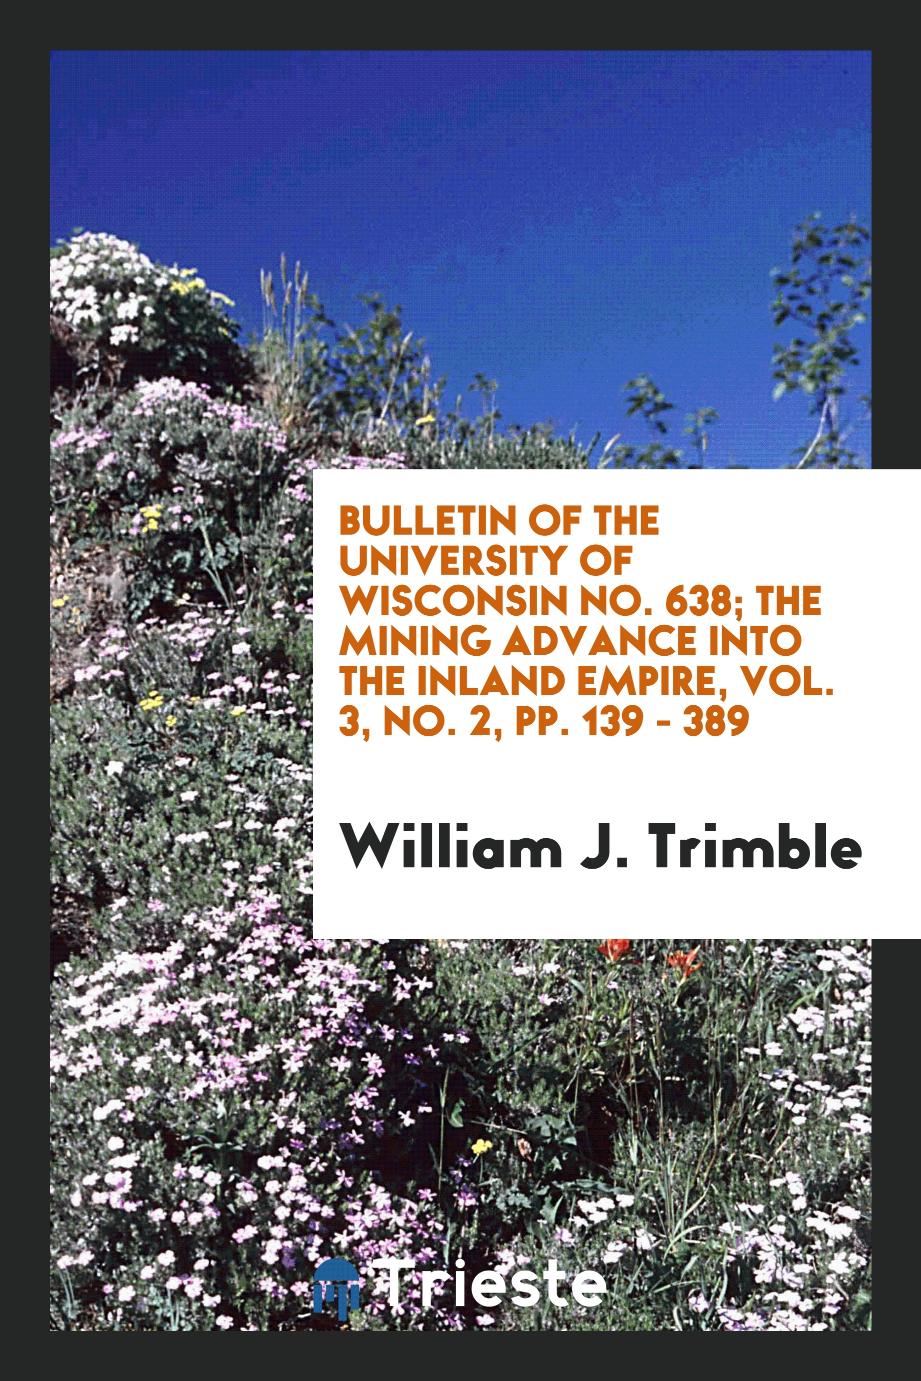 Bulletin of the University of Wisconsin No. 638; The mining advance into the inland empire, Vol. 3, No. 2, pp. 139 - 389